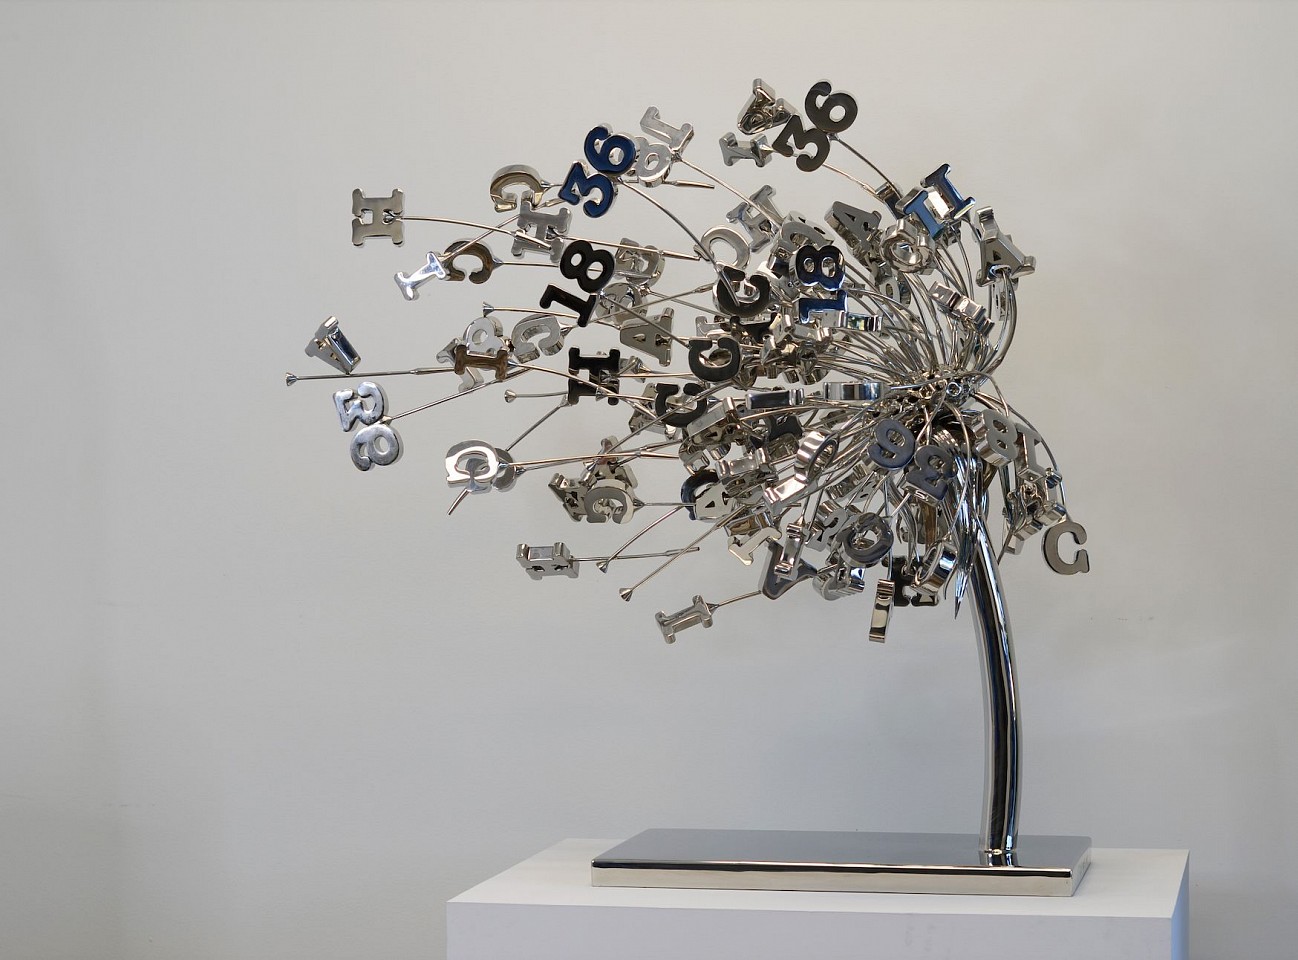 Alexi Torres, Flow Of Life & All Good Things: CHAI 18/36, 2023
316 Marine Grade Stainless Steel Sculpture, 43 x 45 x 26 in.